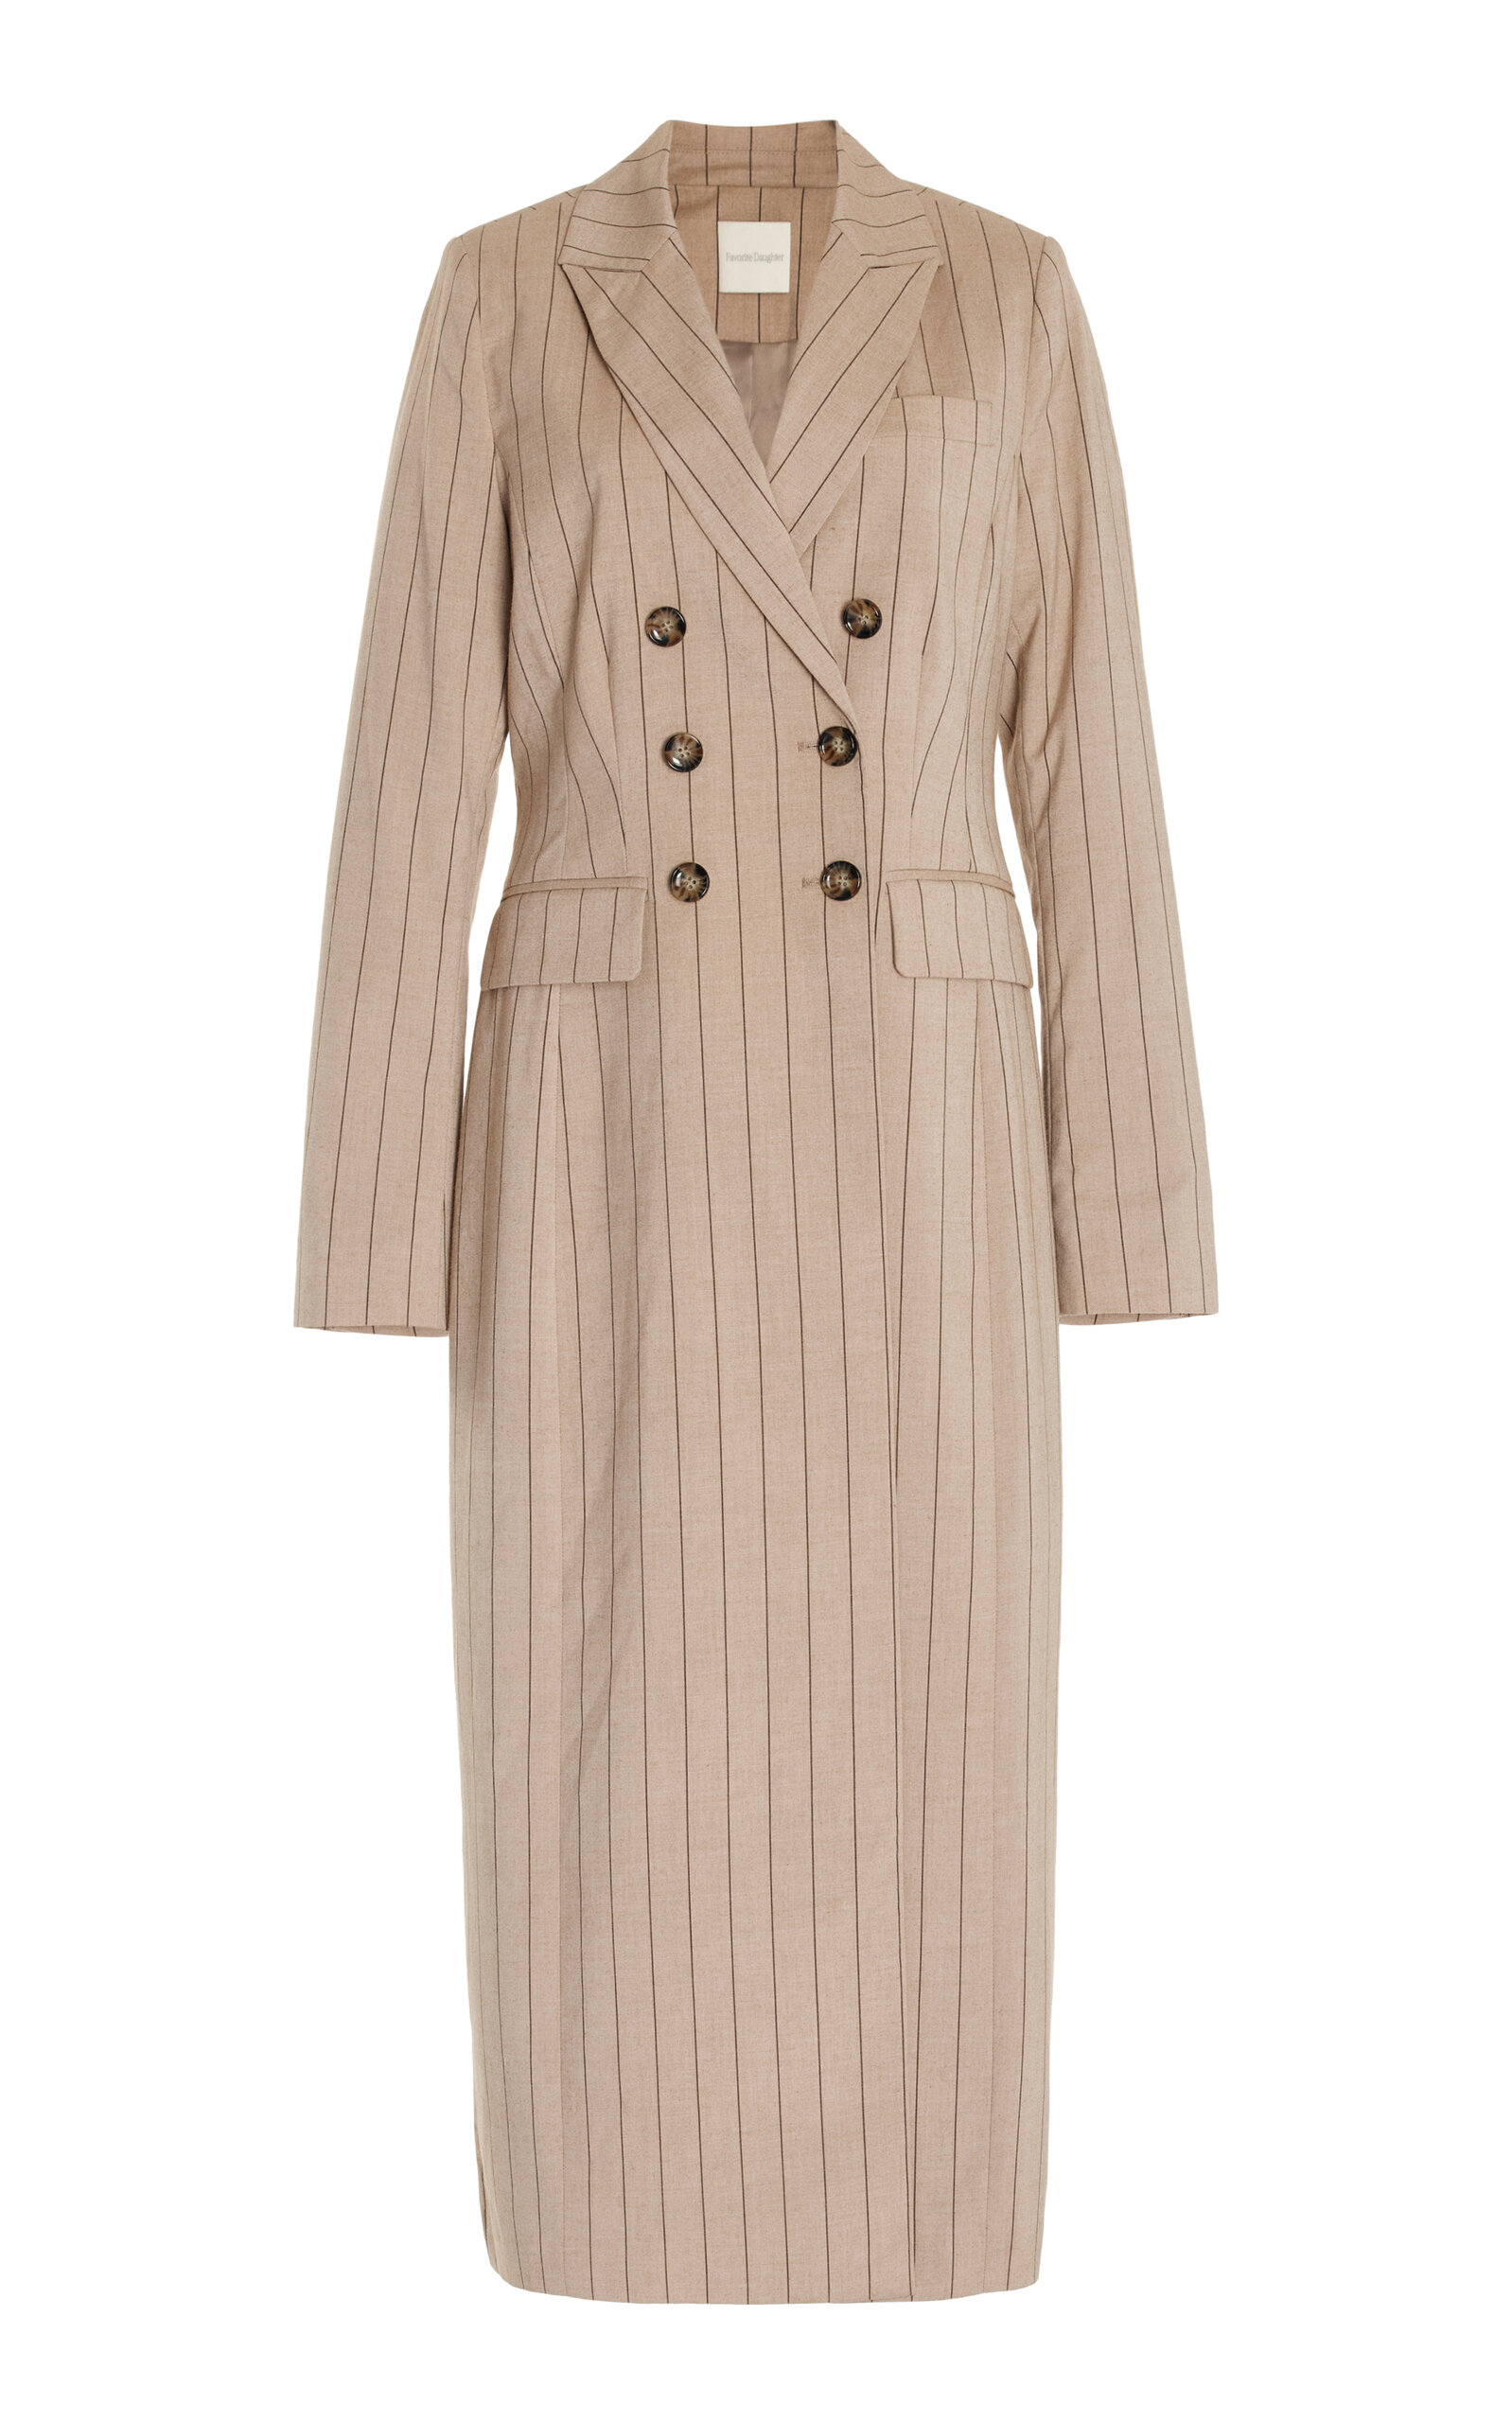 The Meyer Pinstriped Coat